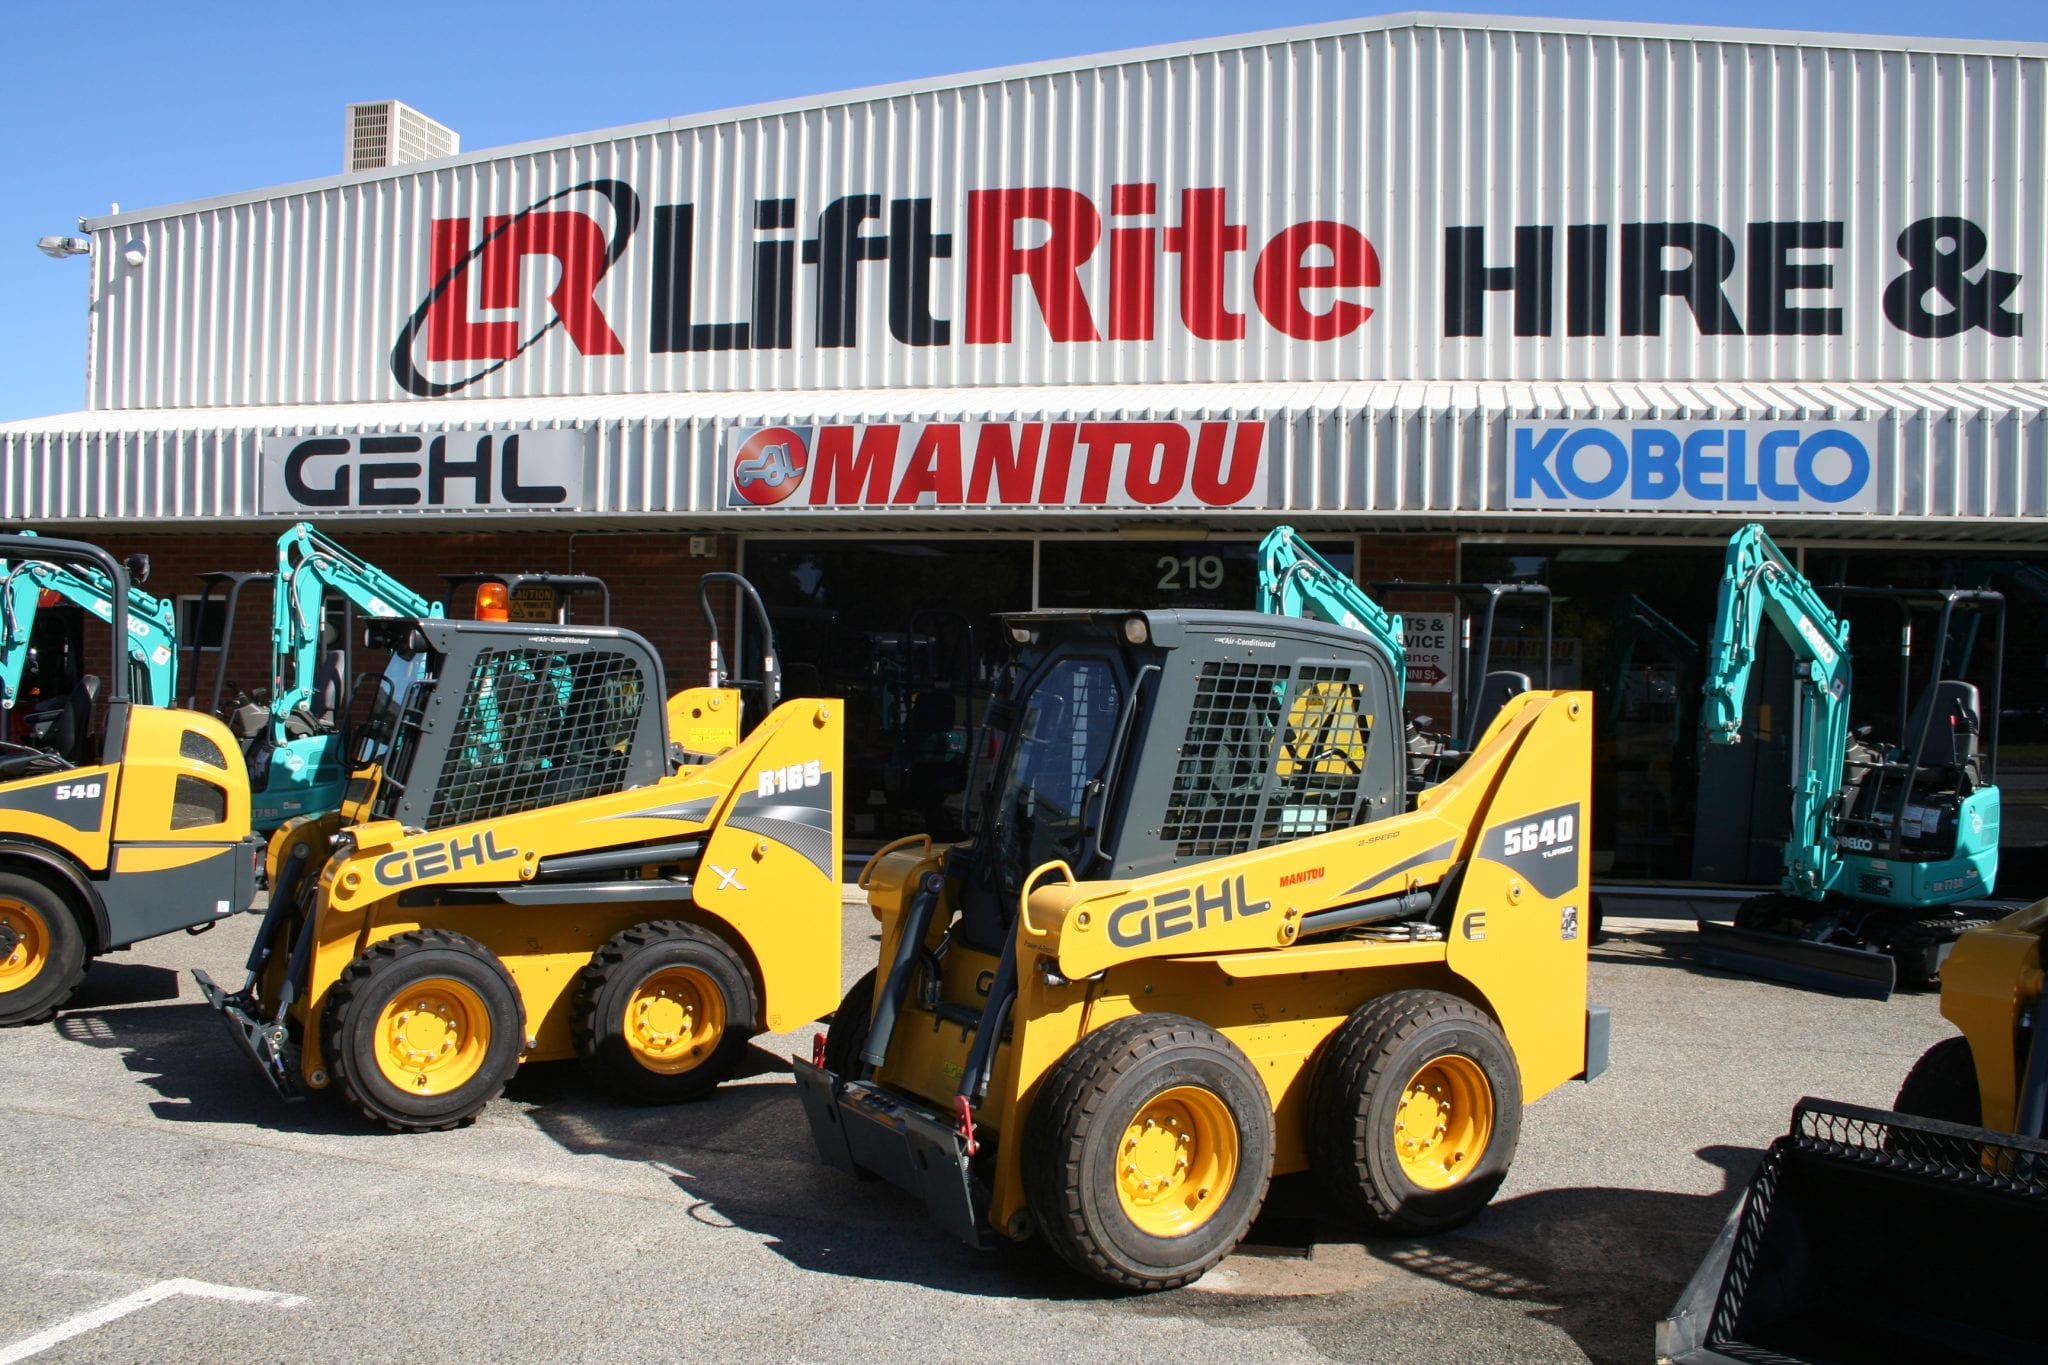 LiftRite Hire & Sales quality machinery